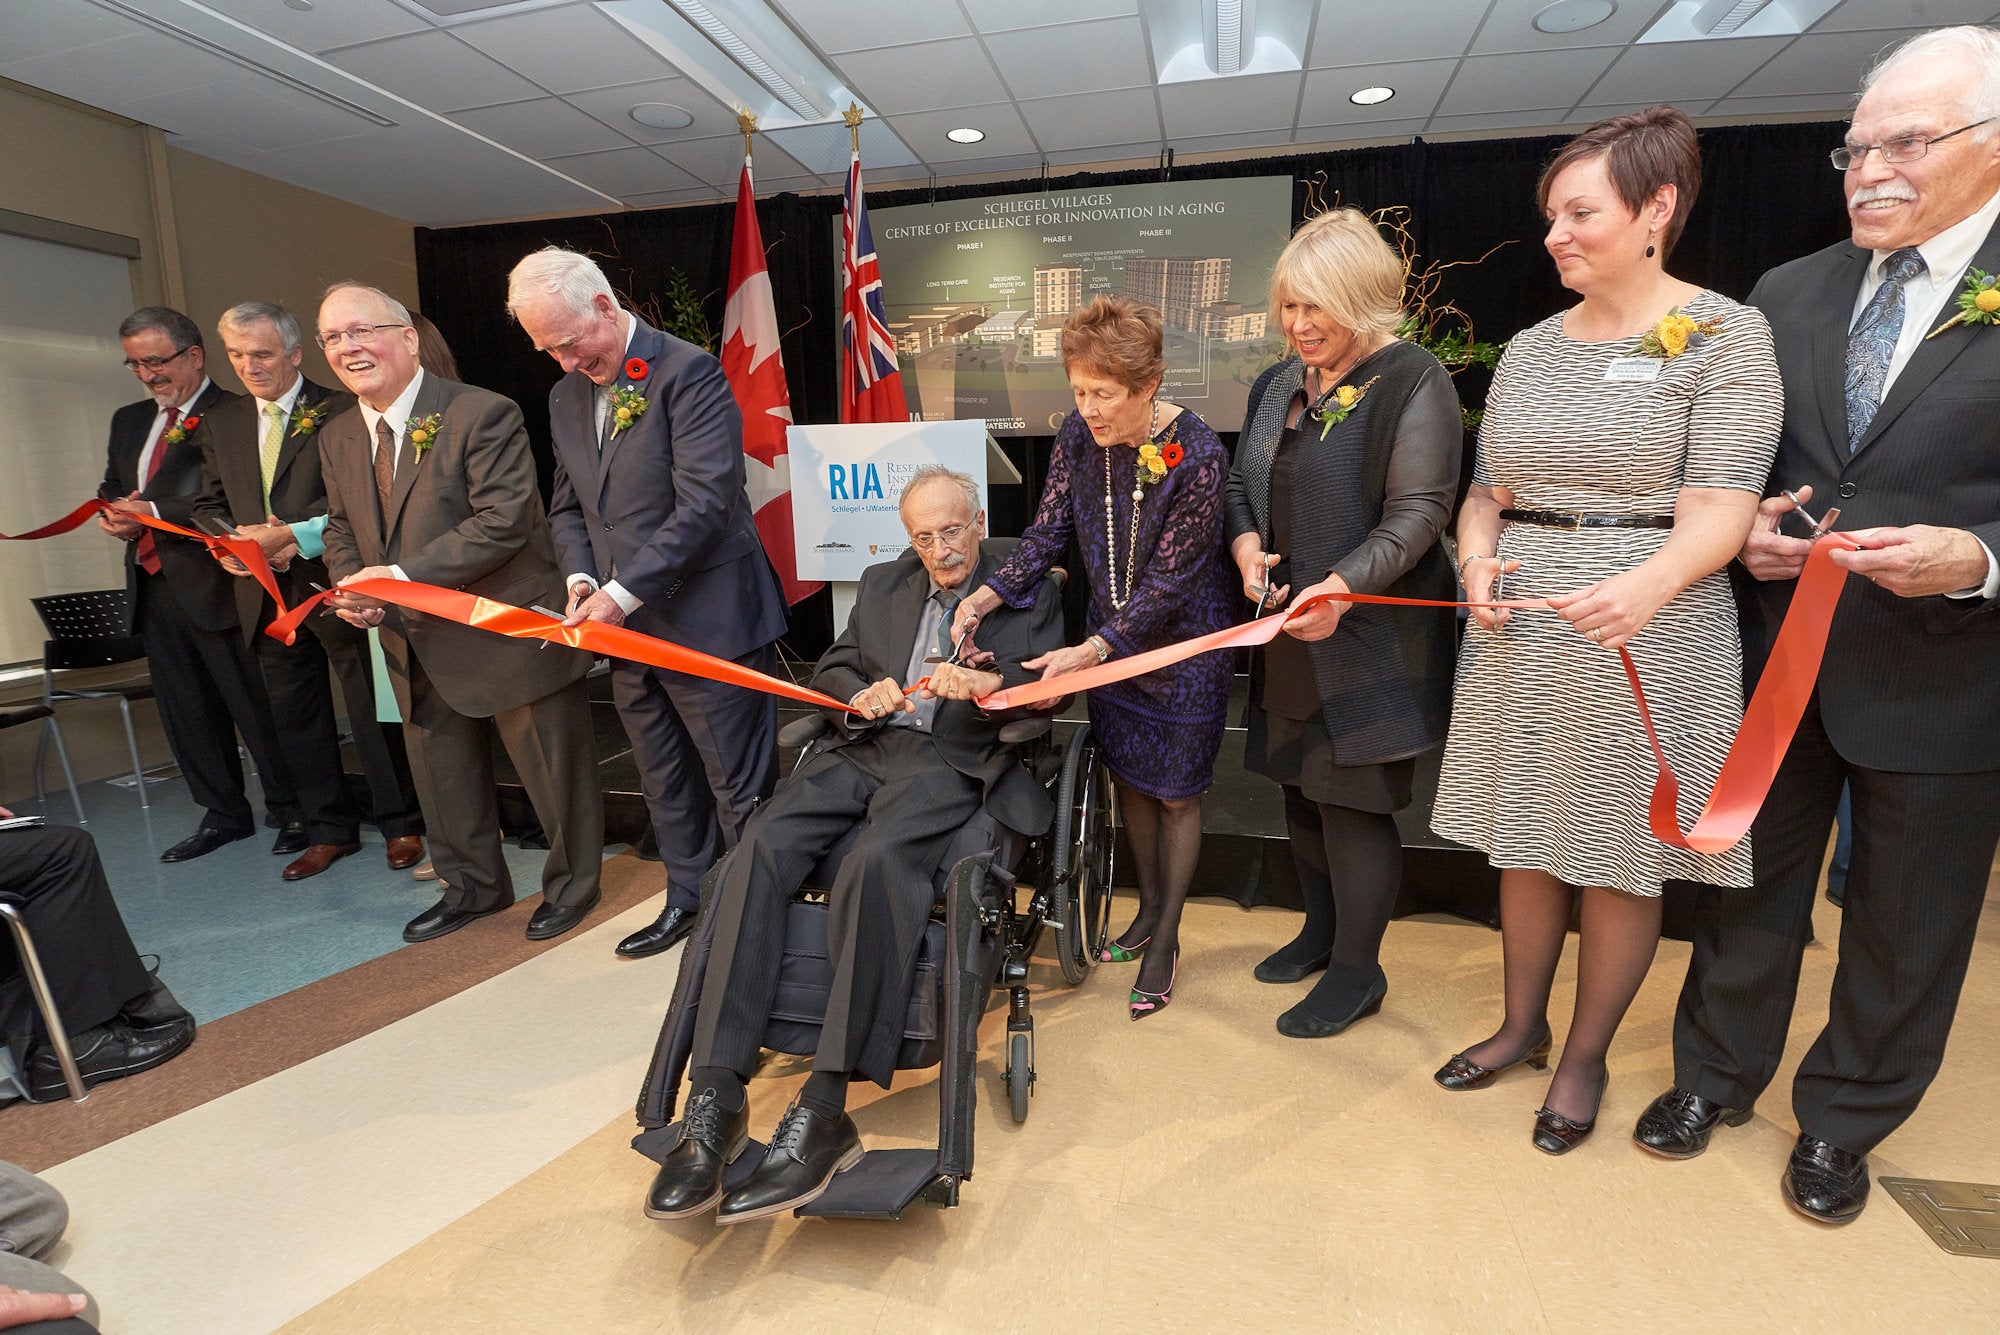 Dignitaries cut the ribbon at the grand opening of the Centre of Excellence for Innovation in Aging.